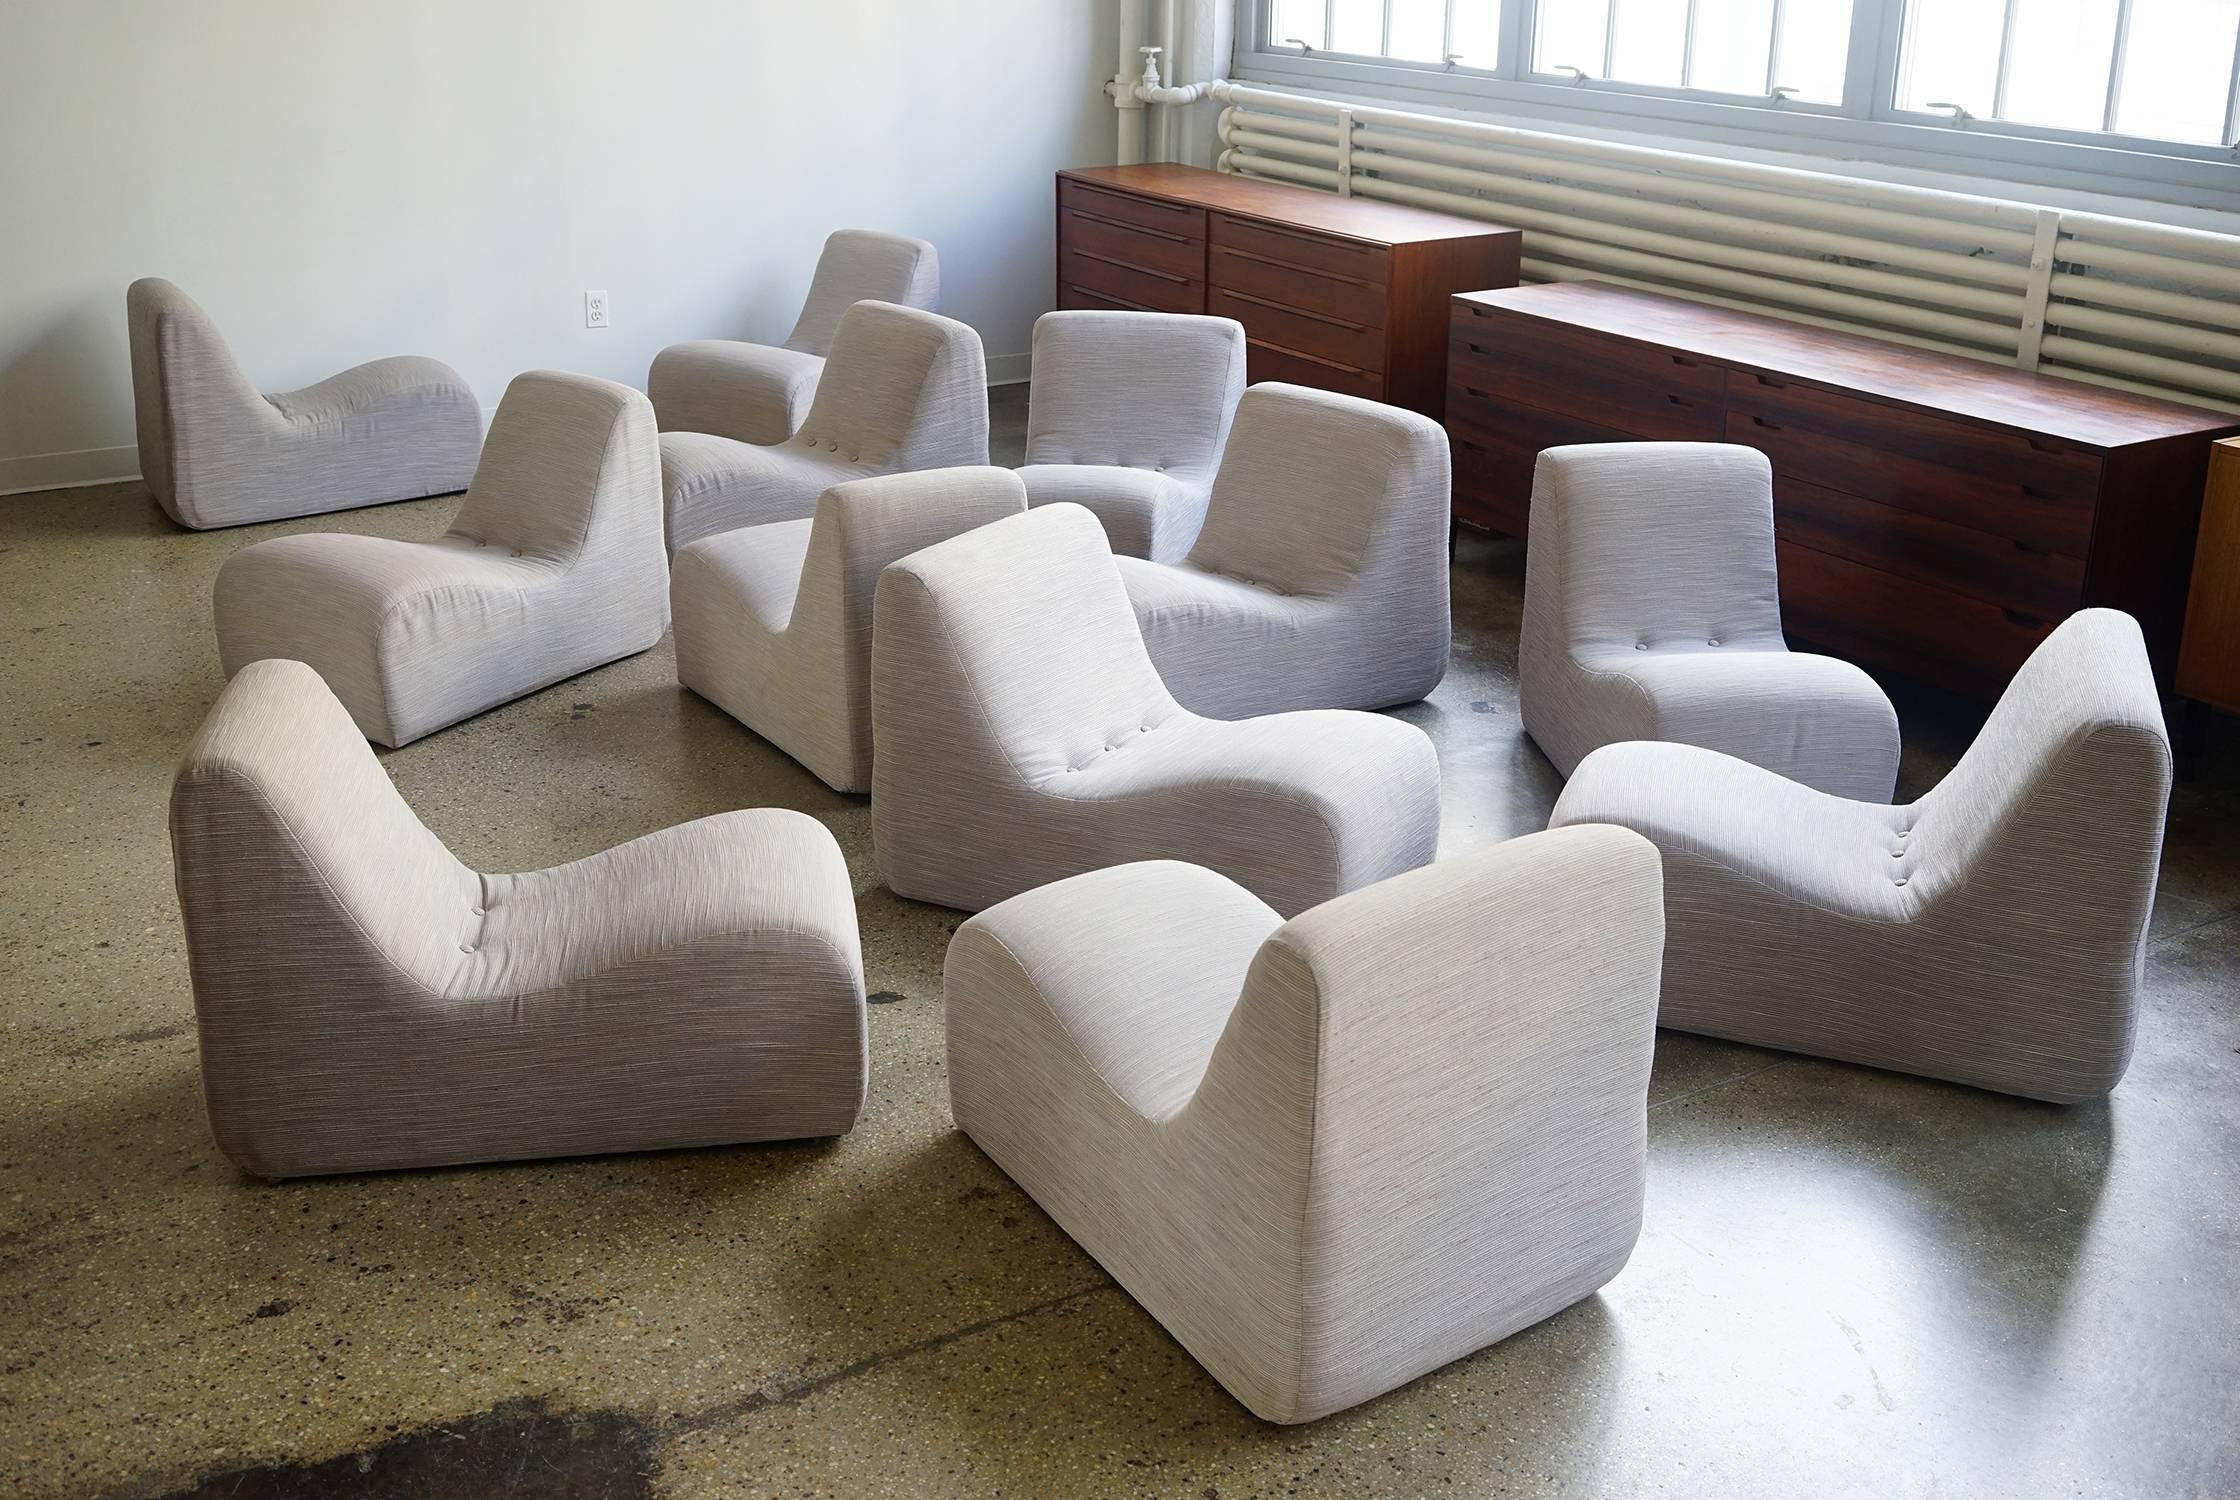 Exceptional 12-piece set comprised of seven inward-turning seats, three outward-turning seats, and two straight seats. Similar seats create a soft curve when sequenced together. Outward turning seats can be alternated with inward-turning seats to